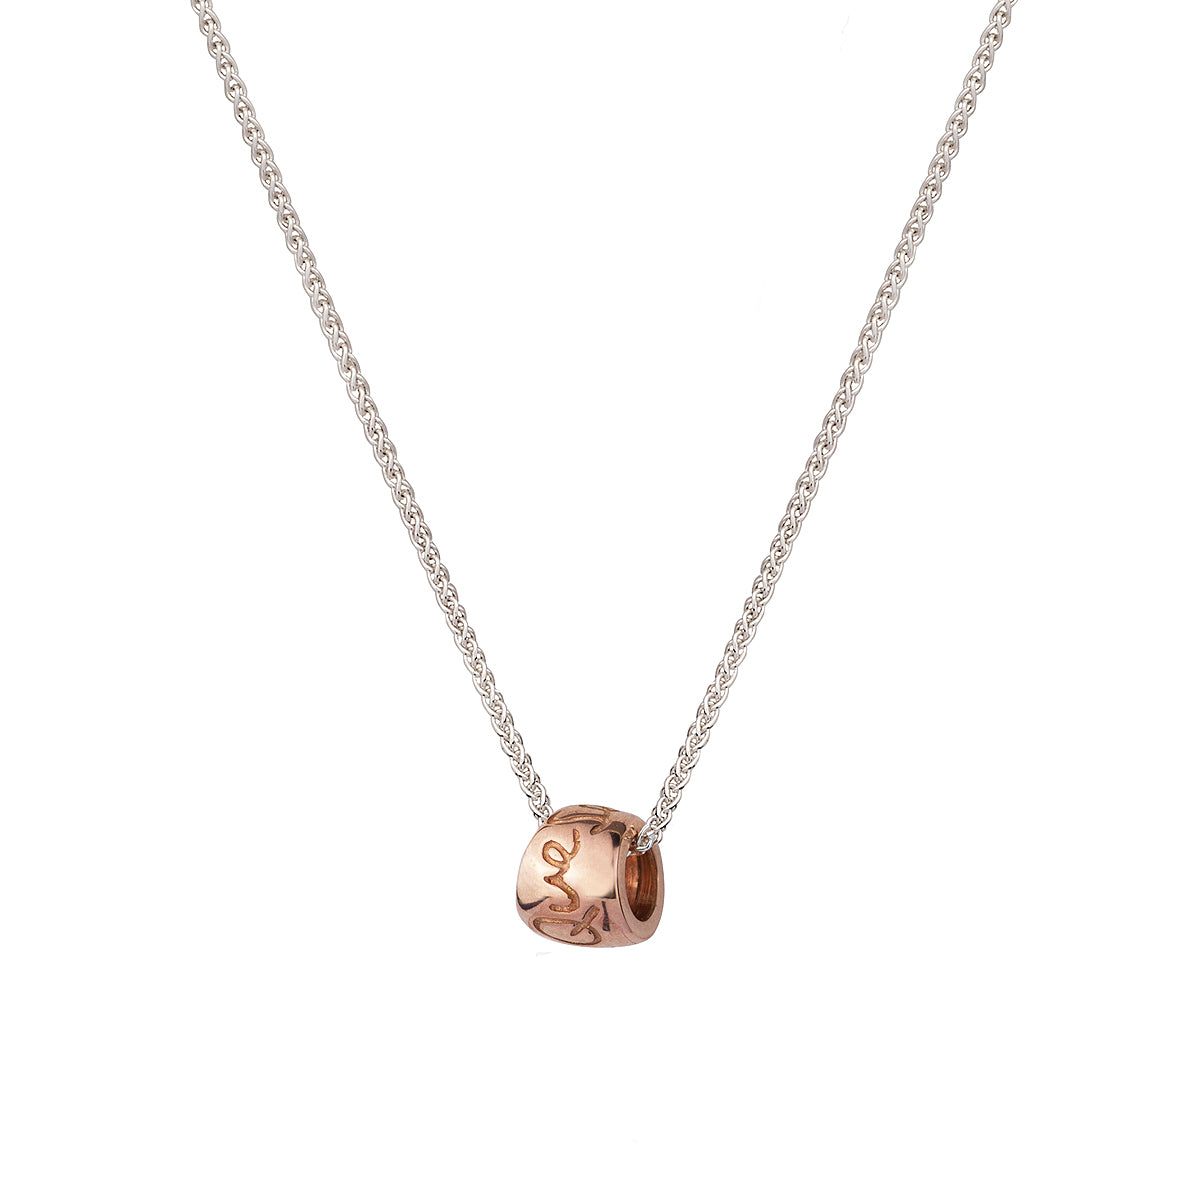 Que Sera Rose Gold Worry Bead Necklace Mindful Slow Fashion Design Scarlett Jewellery UK